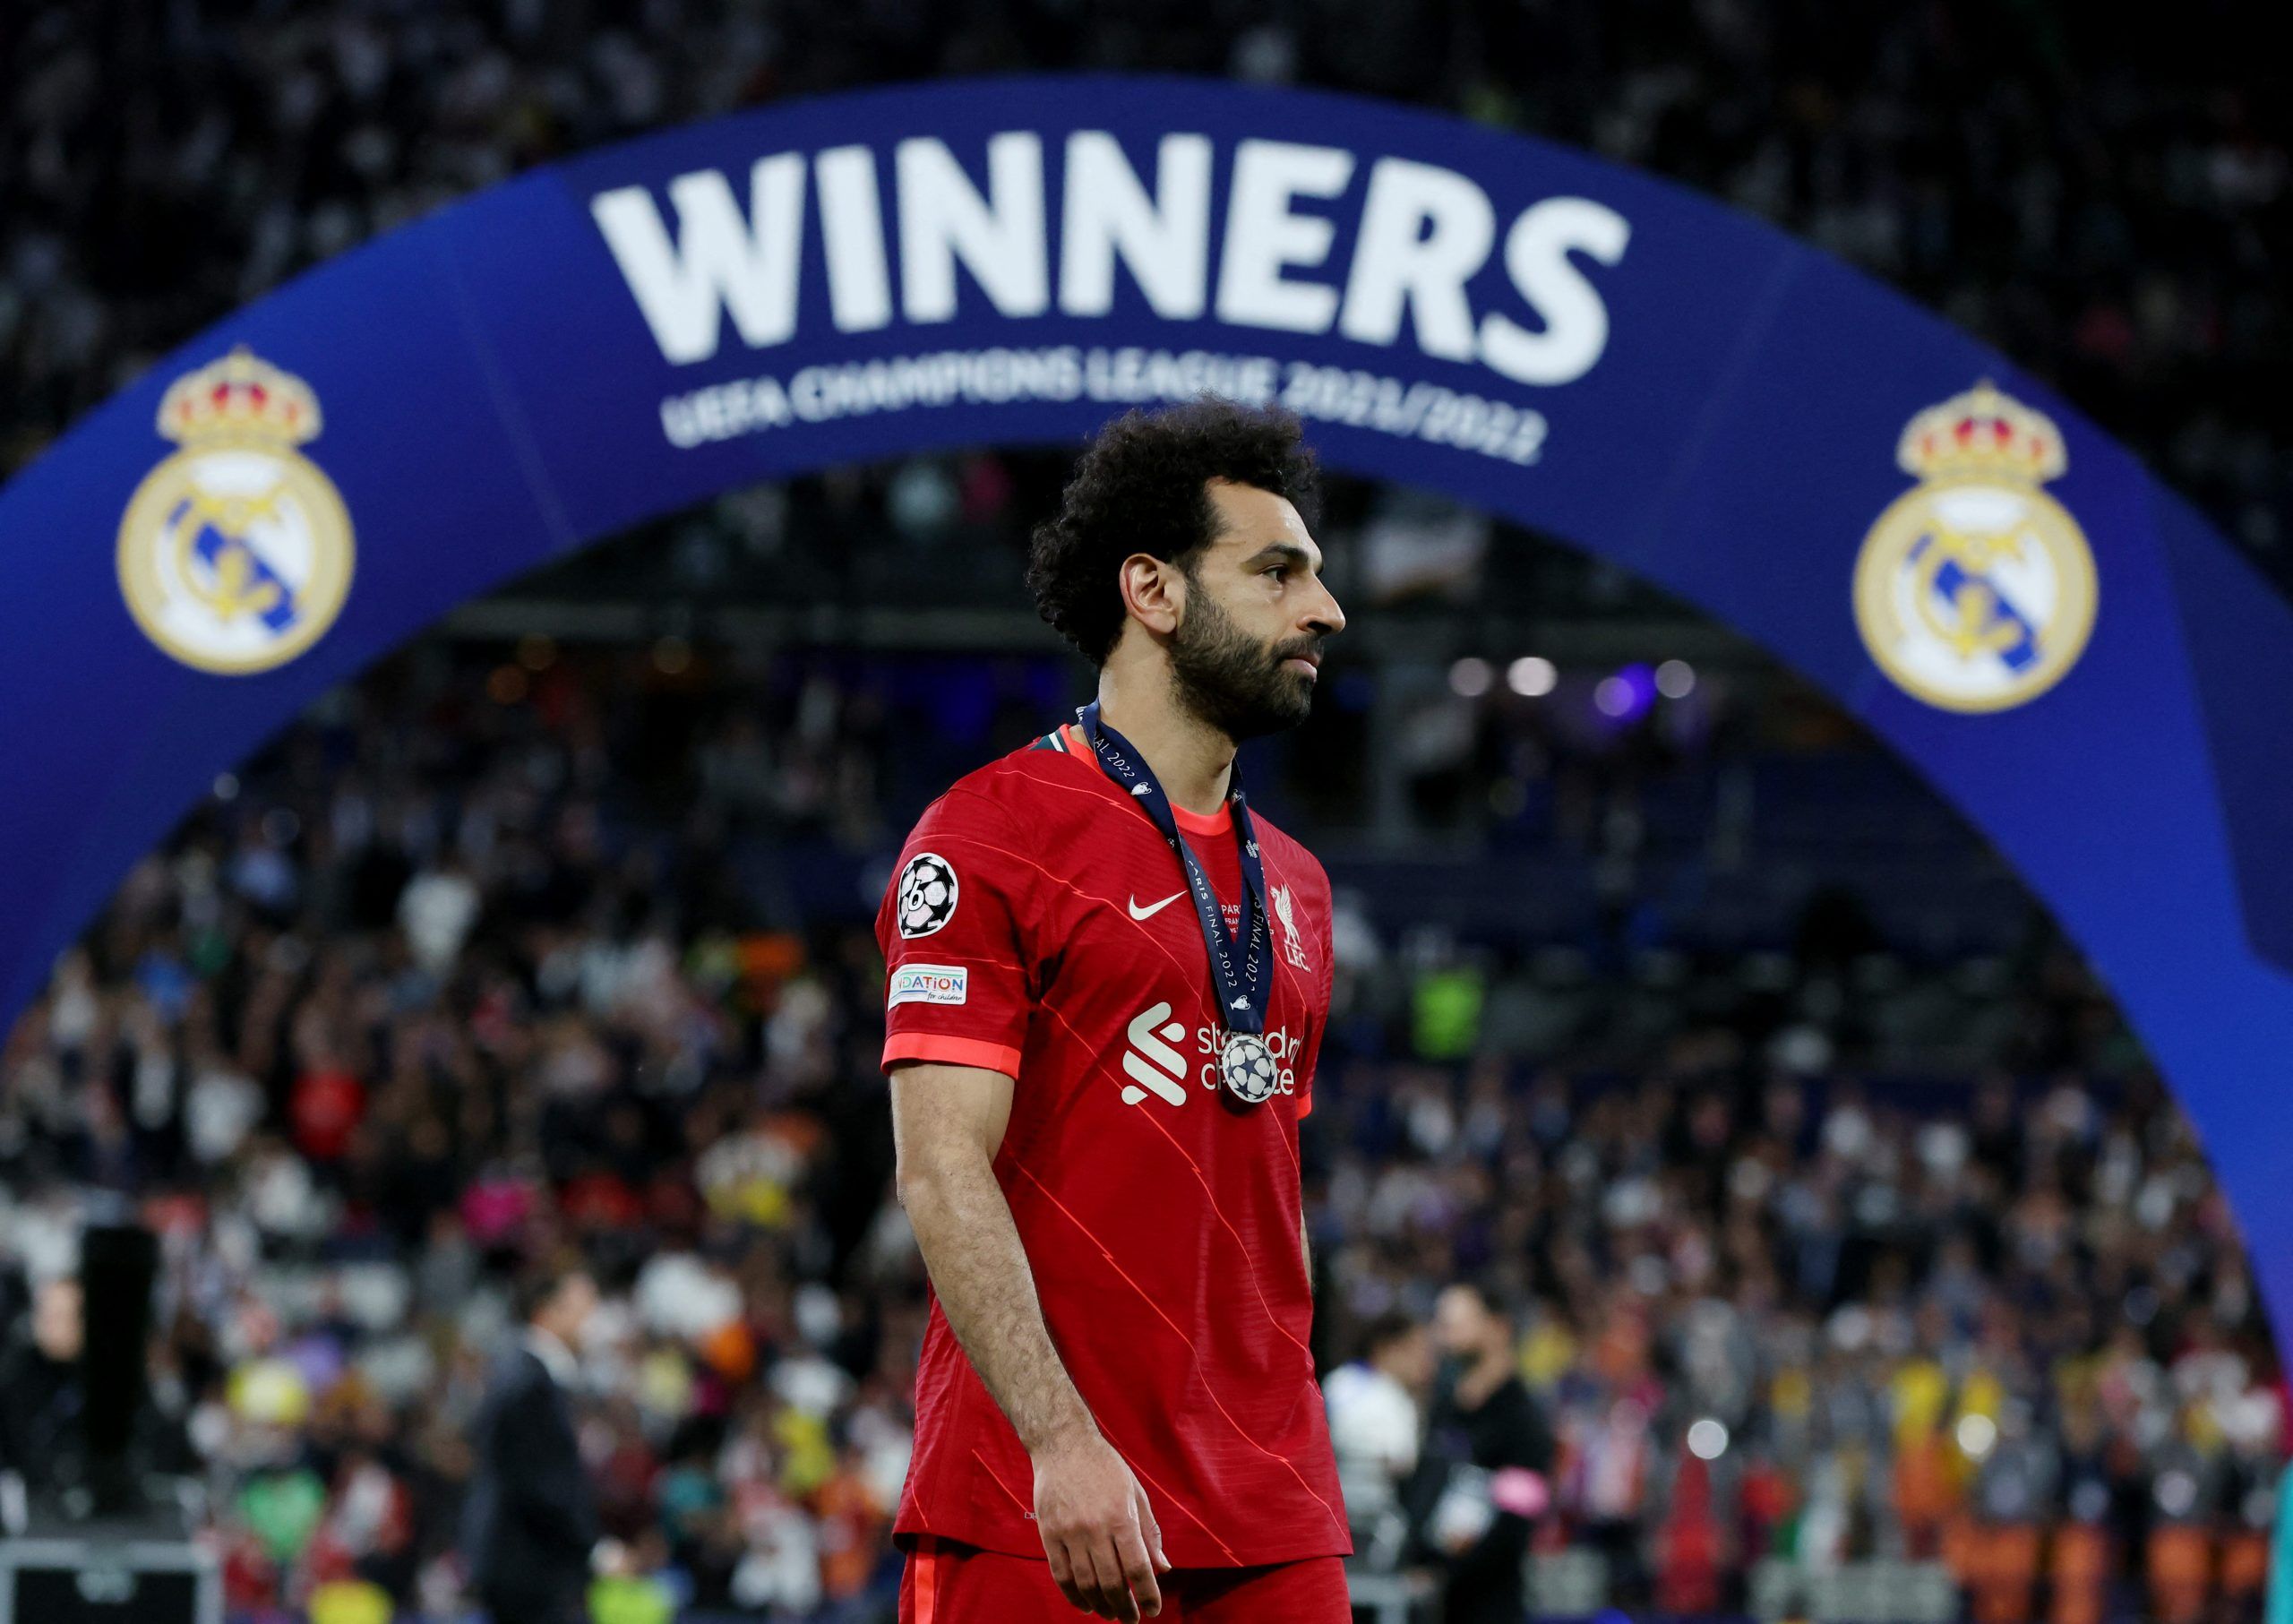 Soccer Football - Champions League Final - Liverpool v Real Madrid - Stade de France, Saint-Denis near Paris, France - May 28, 2022 Liverpool's Mohamed Salah looks dejected as he collects his runners up medal after the match REUTERS/Lee Smith